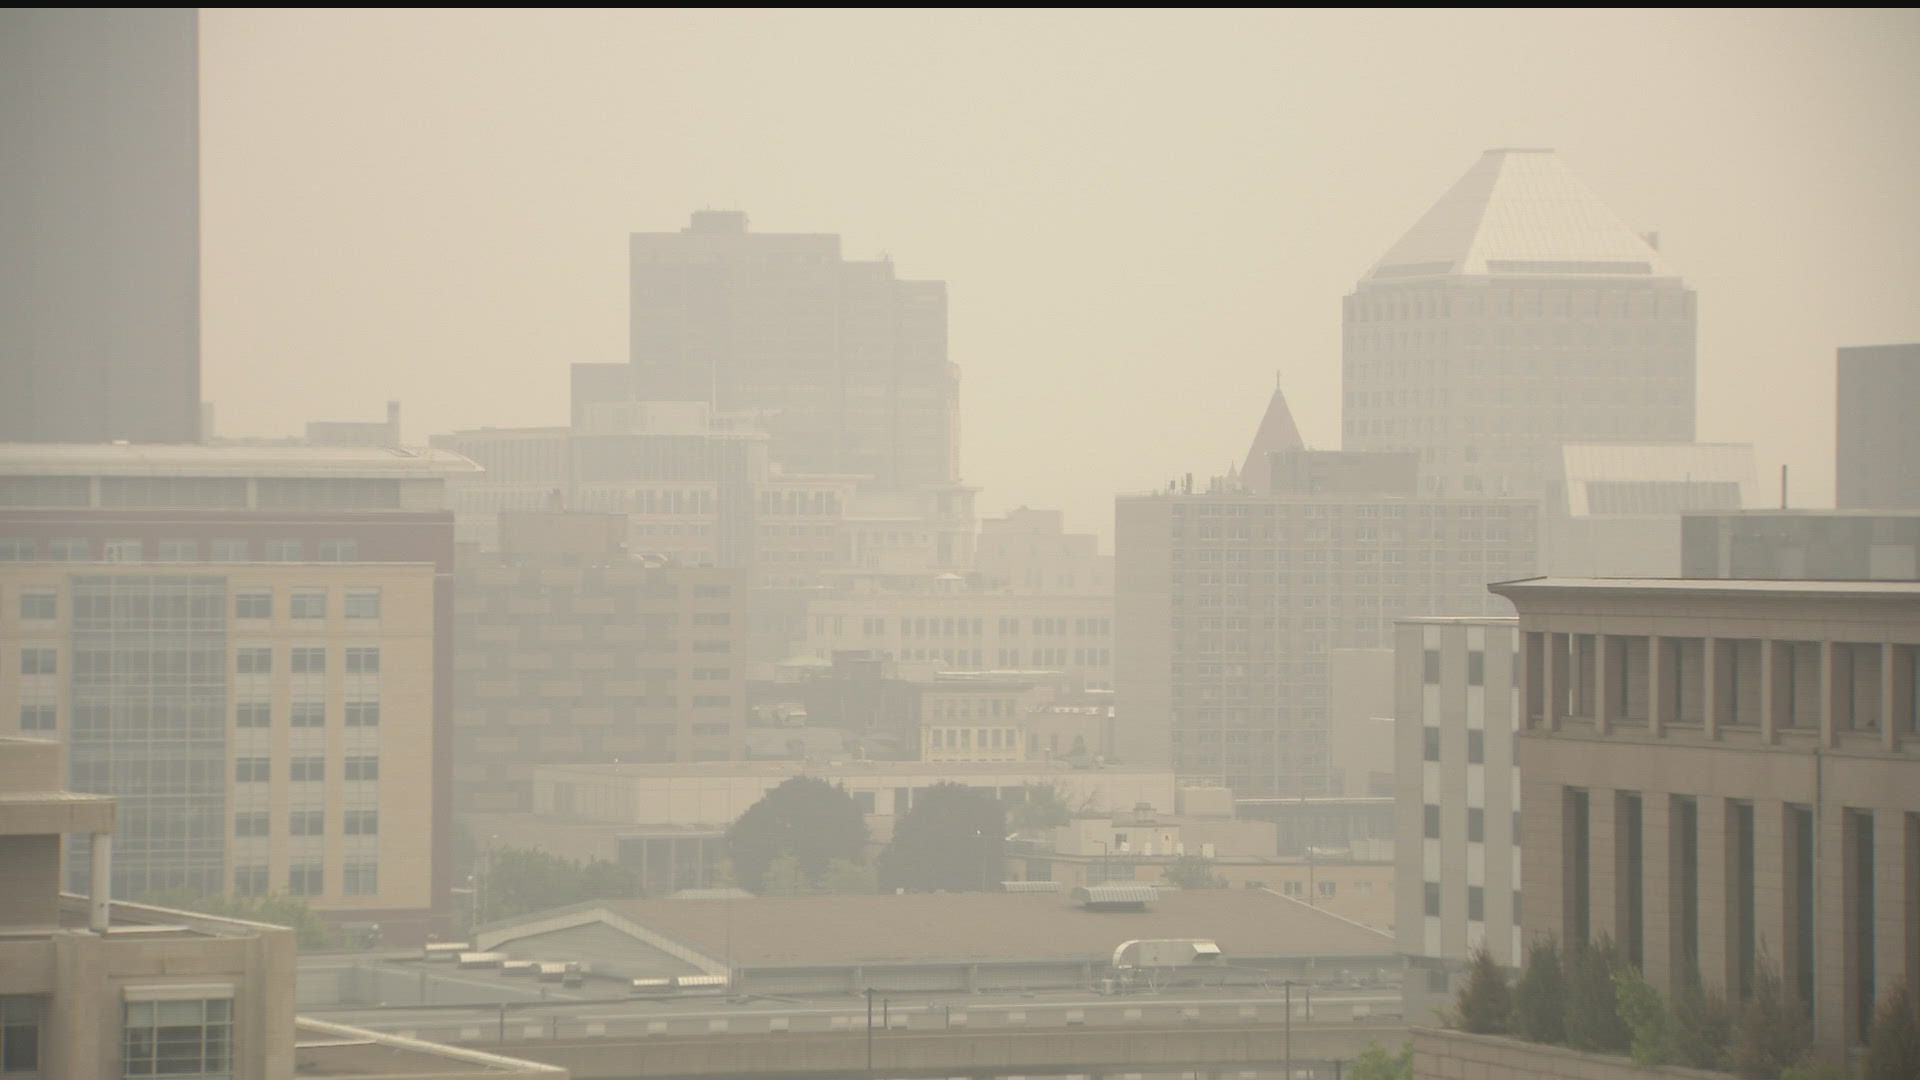 Doctors say the air quality is bad enough that even the average person can experience symptoms like shortness of breath and chest tightness.